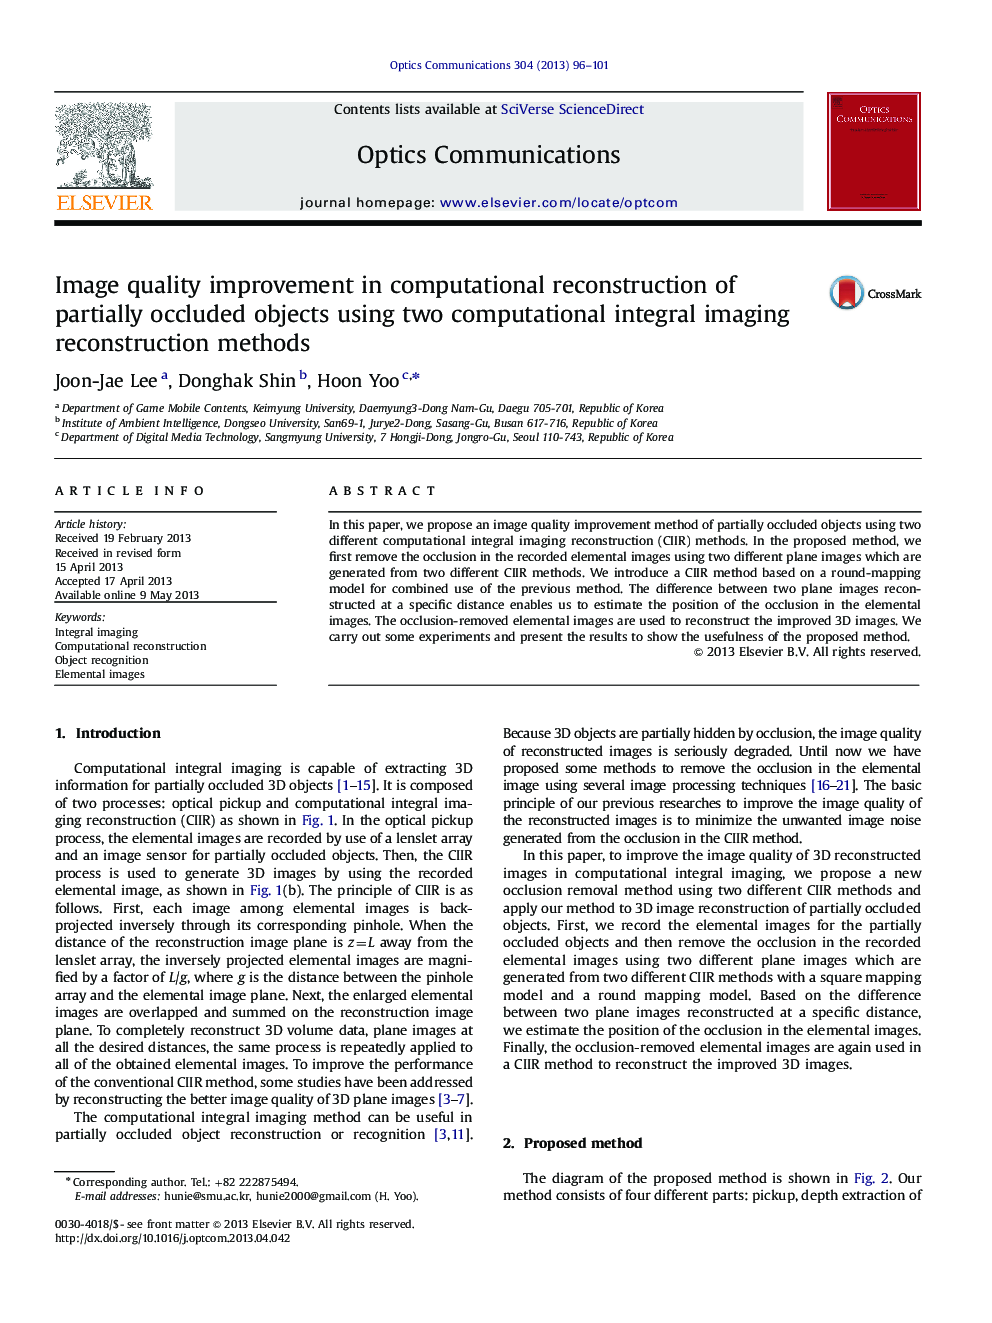 Image quality improvement in computational reconstruction of partially occluded objects using two computational integral imaging reconstruction methods